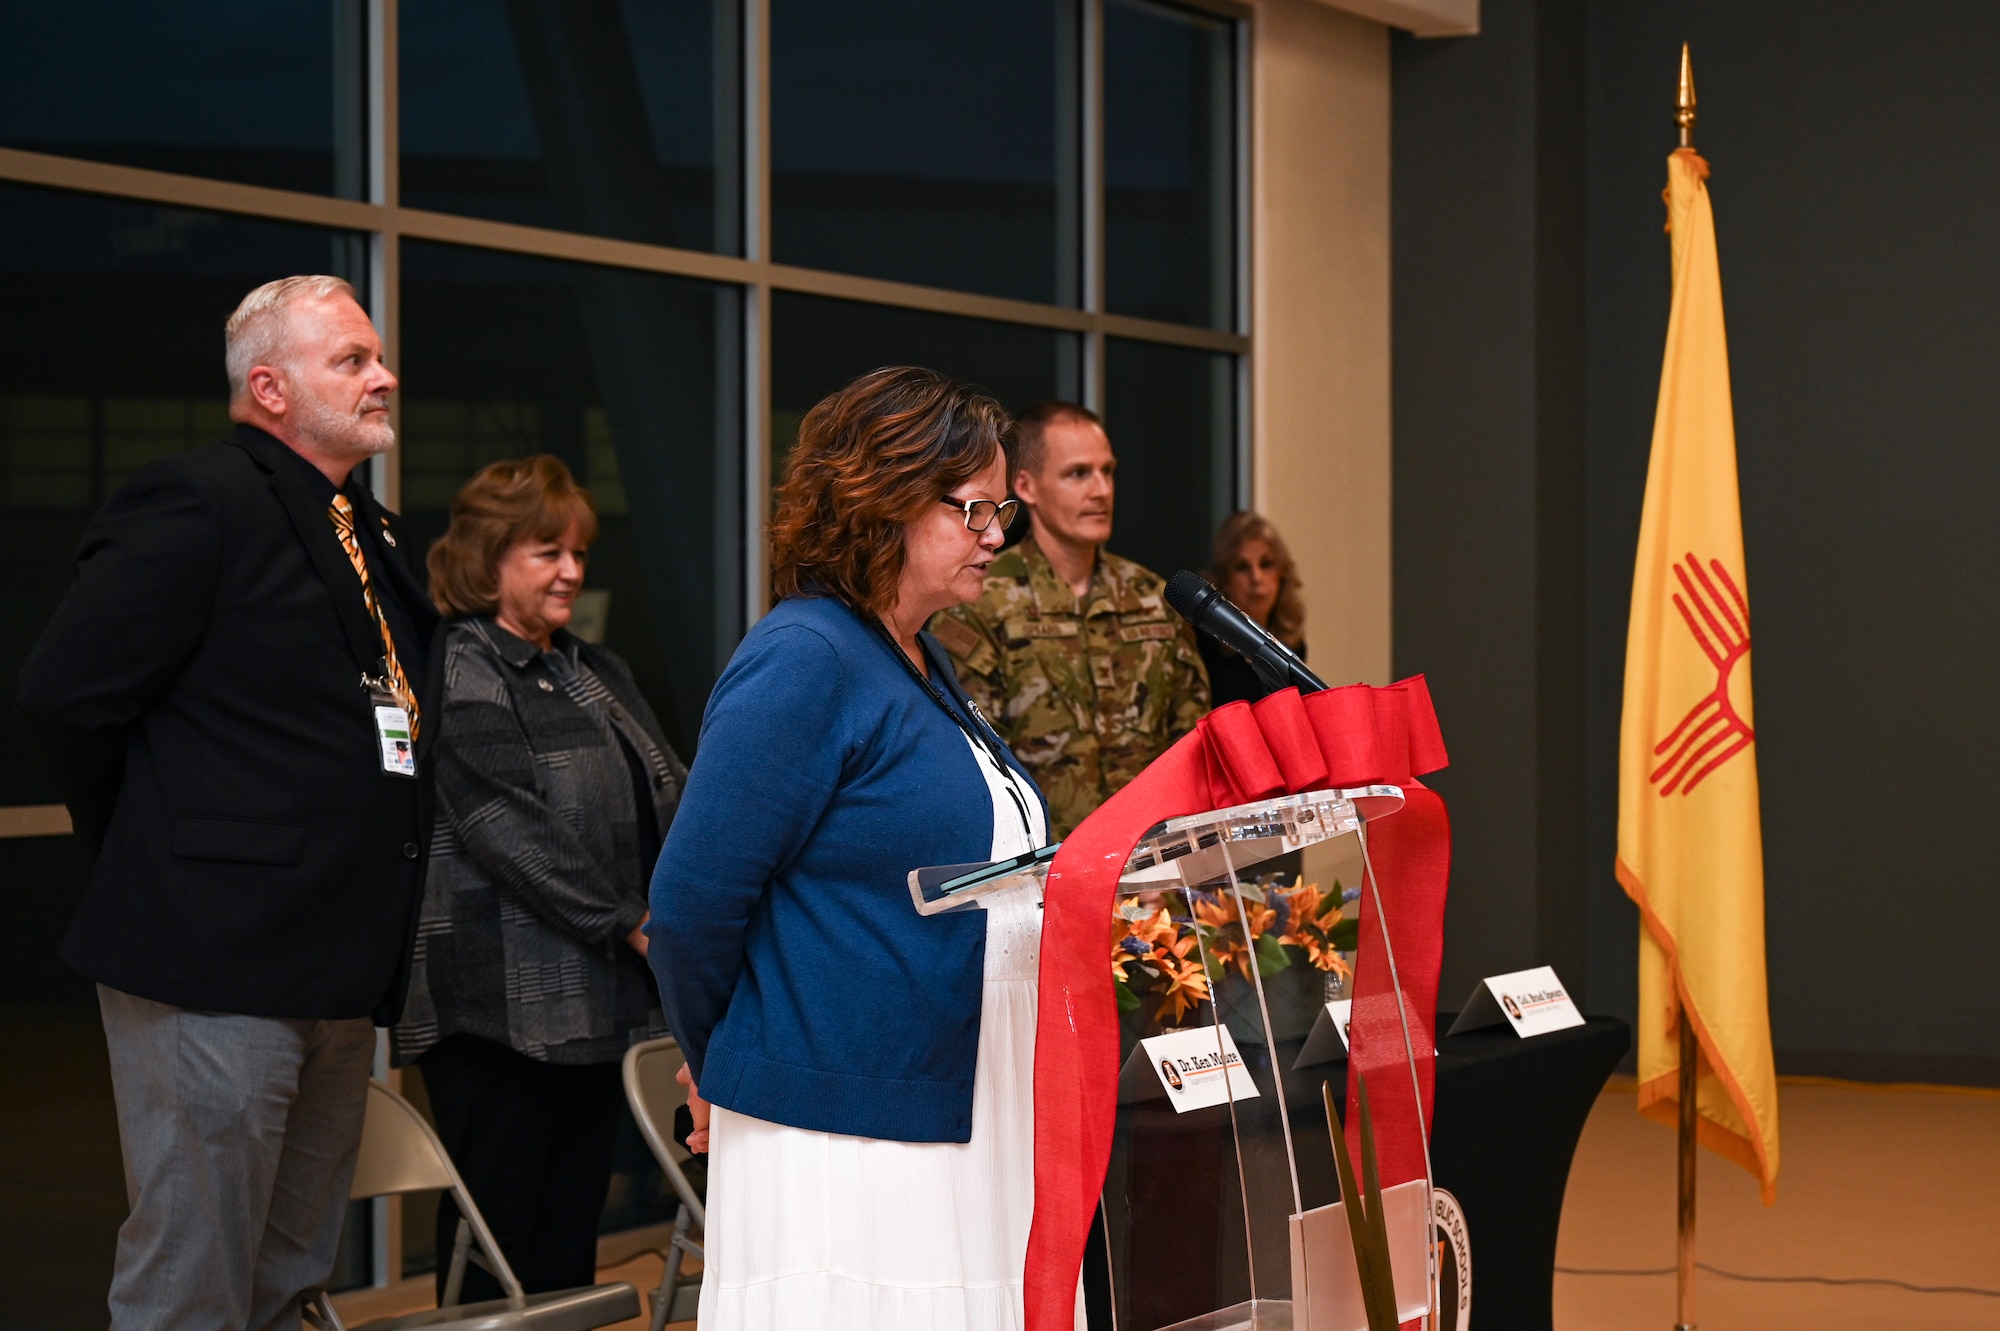 Pamela Renteria, Alamogordo Public Schools deputy superintendent, gives opening remarks to the Holloman Elementary School Ribbon Cutting and Open House at Holloman Air Force Base, New Mexico, Jan. 17, 2023. The school hosts a mixture of students from both civilian and military families. (U.S. Air Force photo by Airman 1st Class Isaiah Pedrazzini)